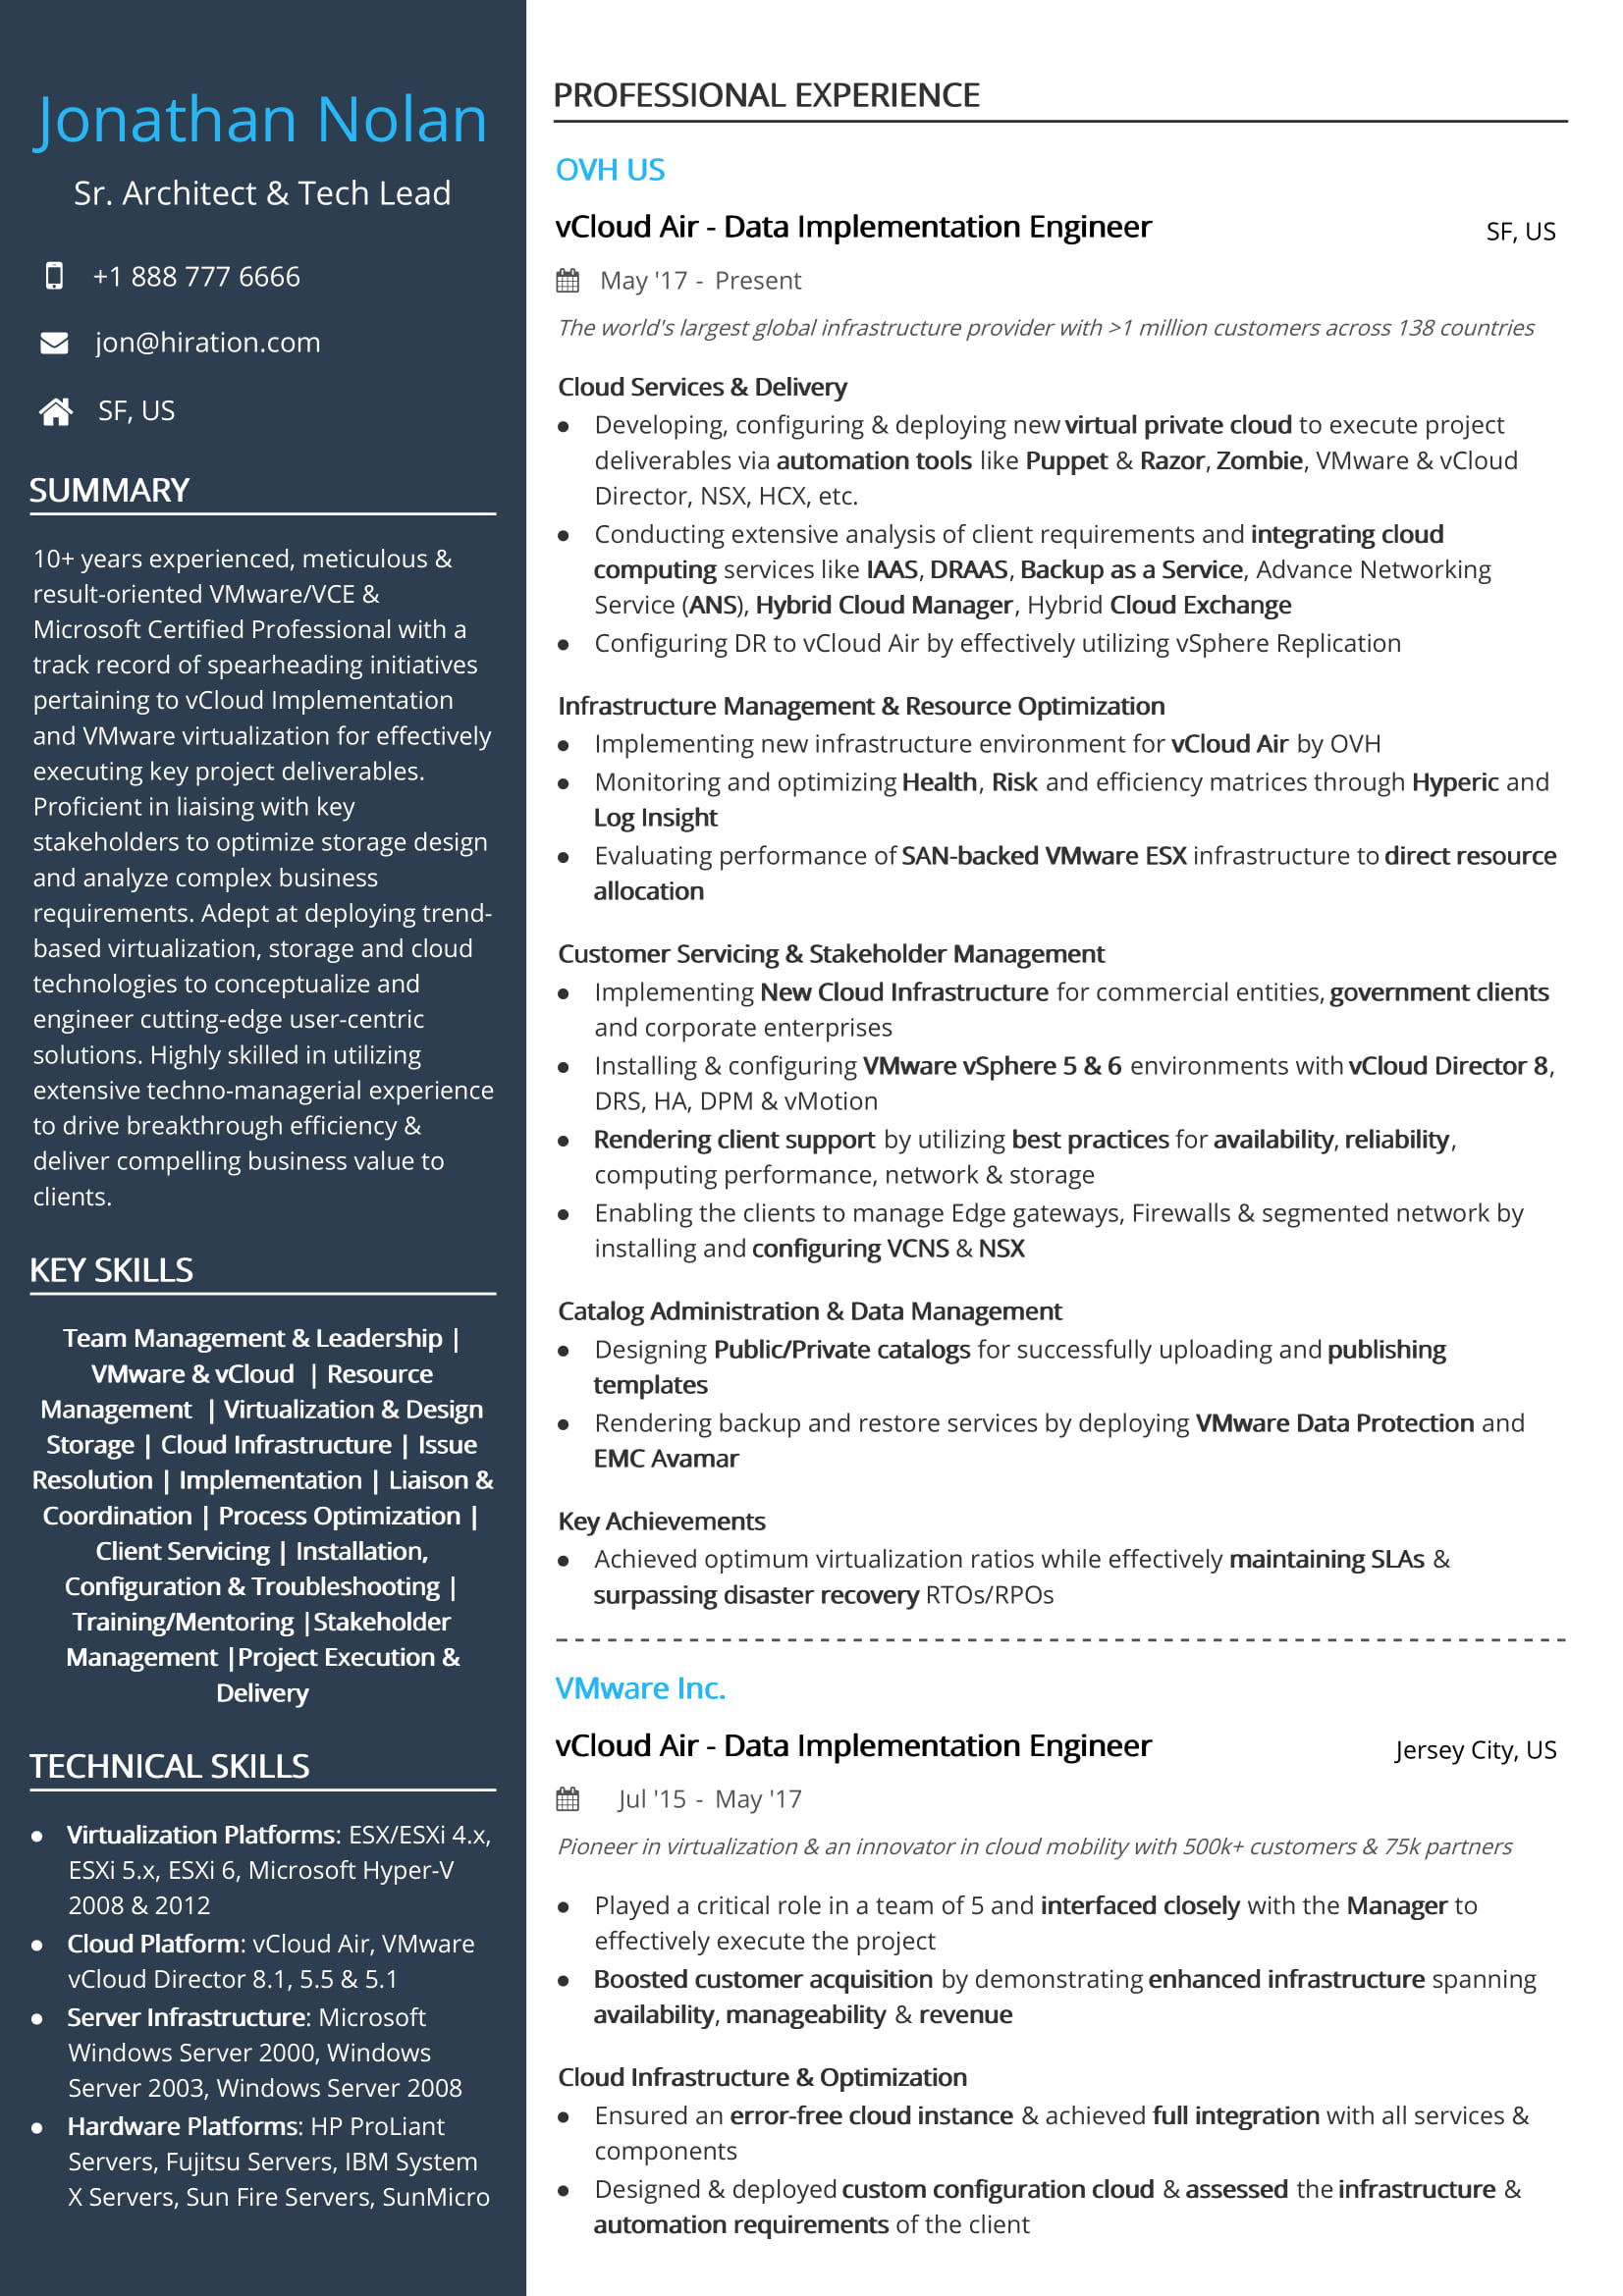 Resume Sample for Windows and Vmware Administrator Free Senior Architect and Tech Lead Resume Sample 2020 by Hiration